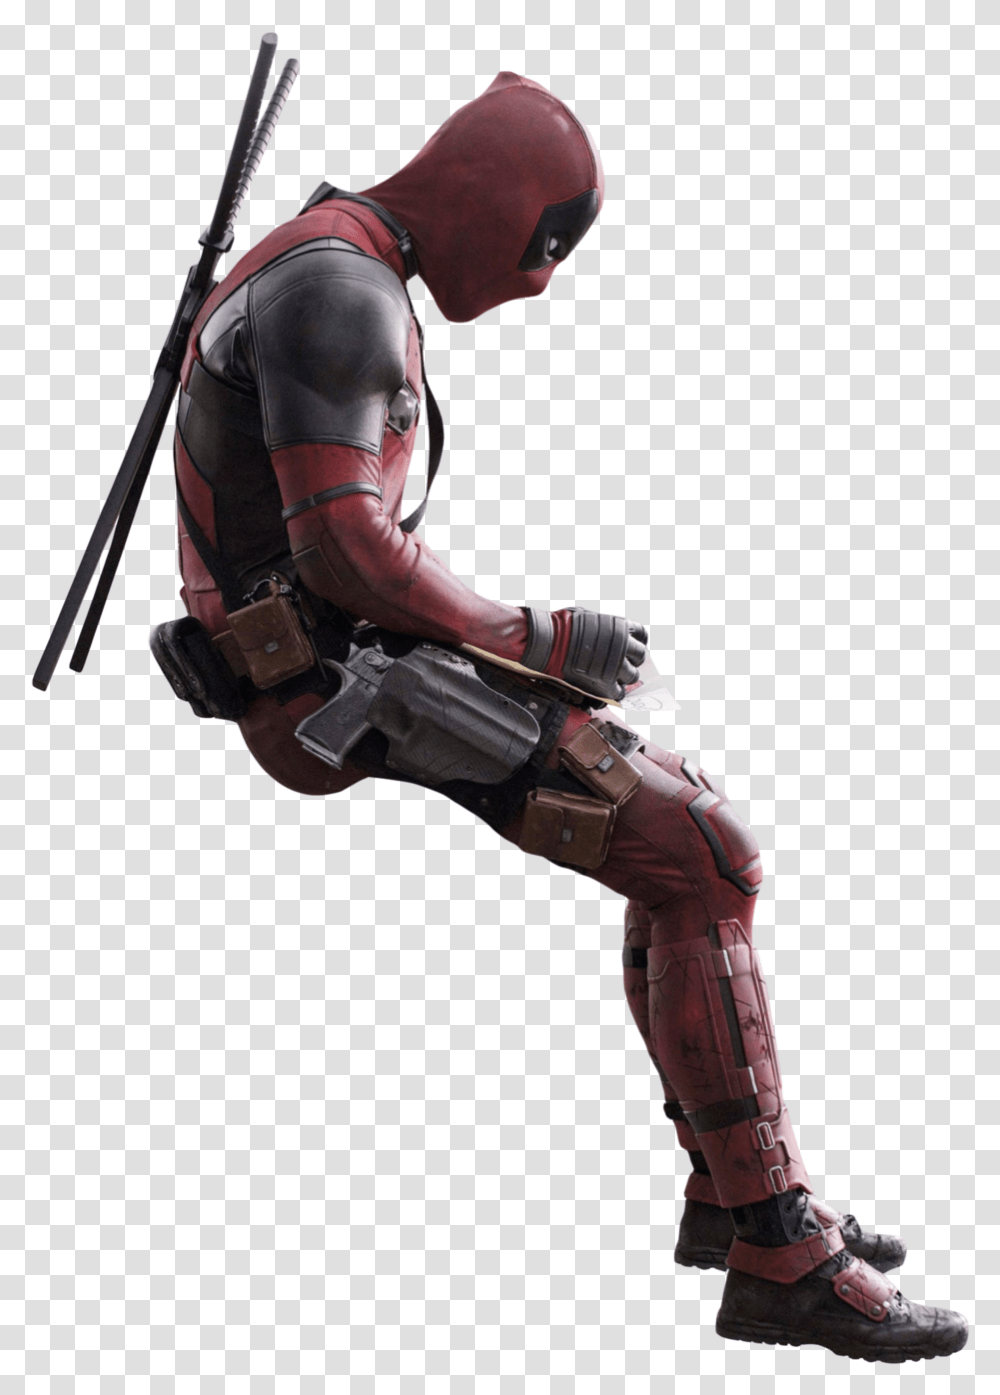 Deadpool Image Deadpool, Person, Human, Weapon, Weaponry Transparent Png